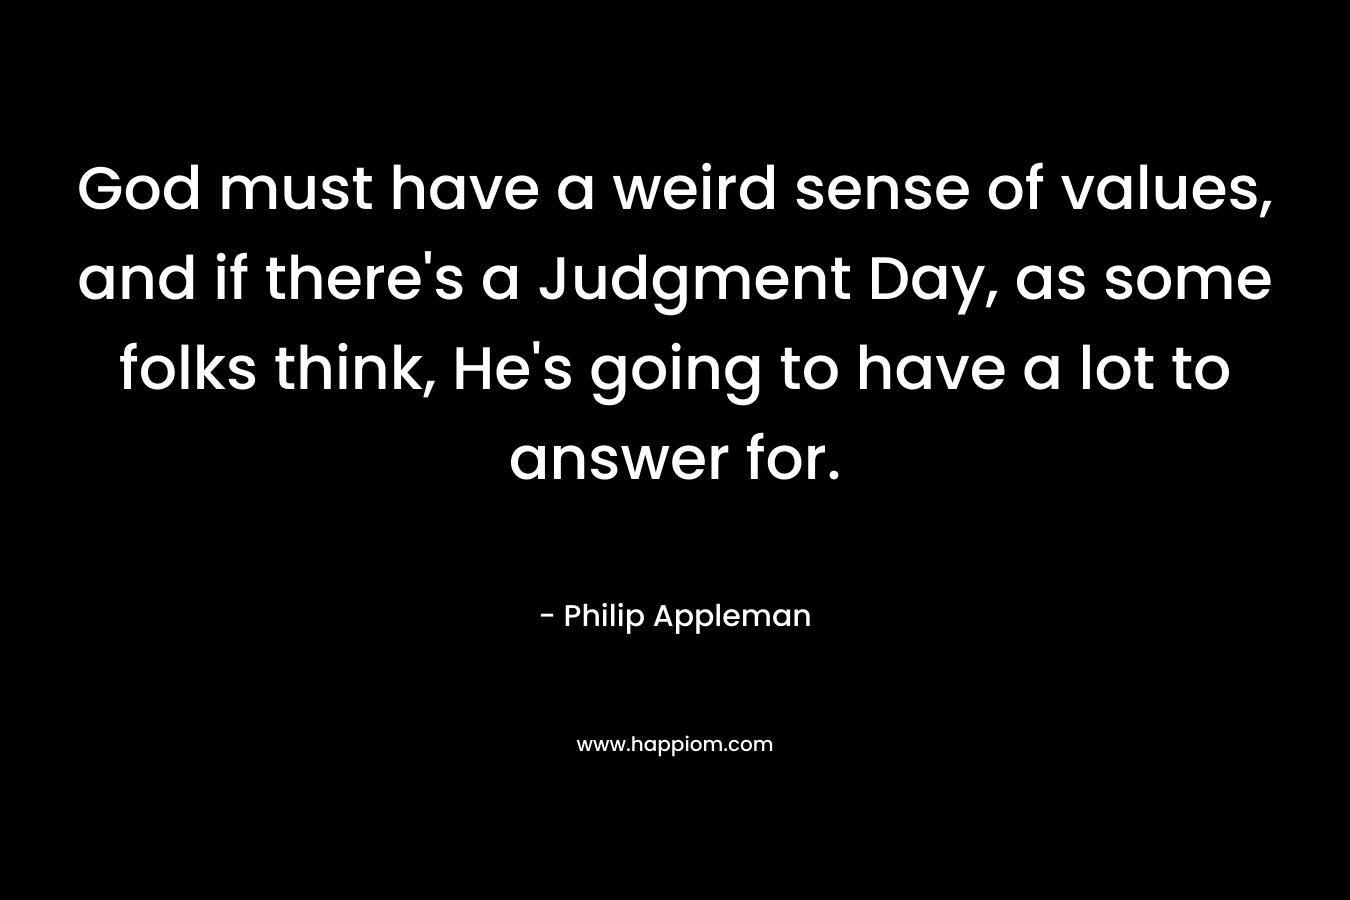 God must have a weird sense of values, and if there’s a Judgment Day, as some folks think, He’s going to have a lot to answer for. – Philip Appleman